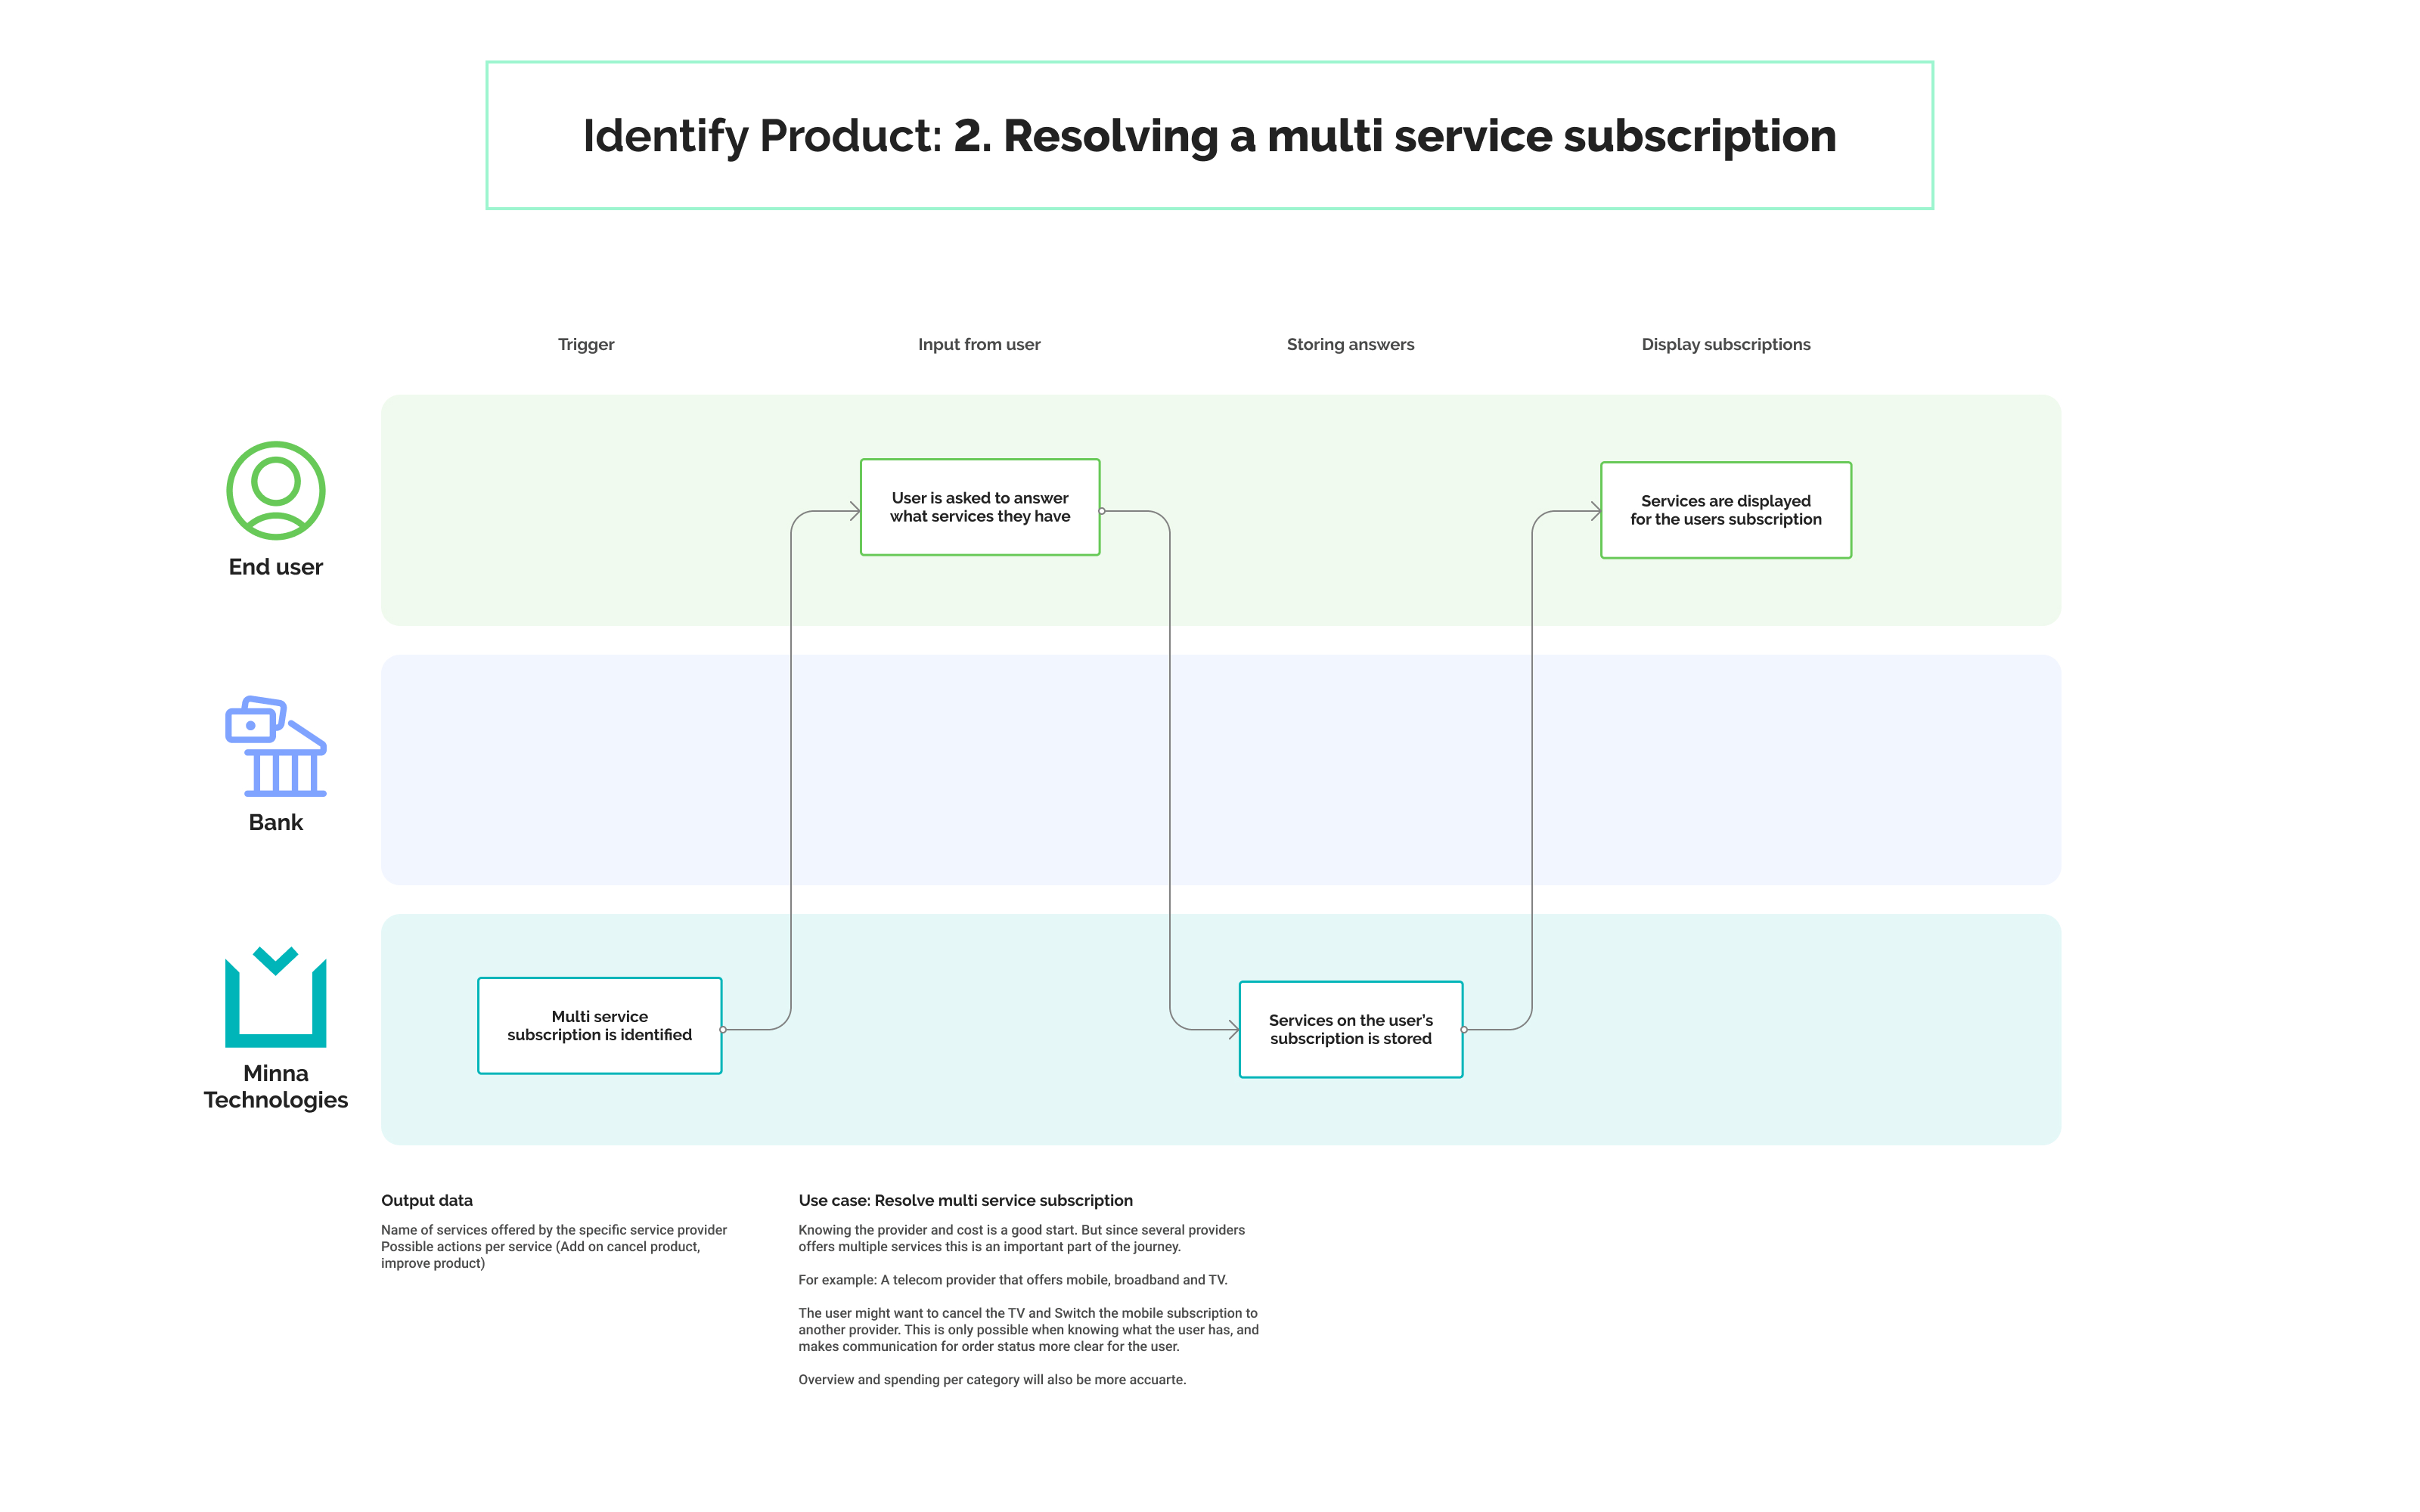 When a subscription associated with a multi service provider is identified, the user is asked to provide which service(s) she has for that service provider